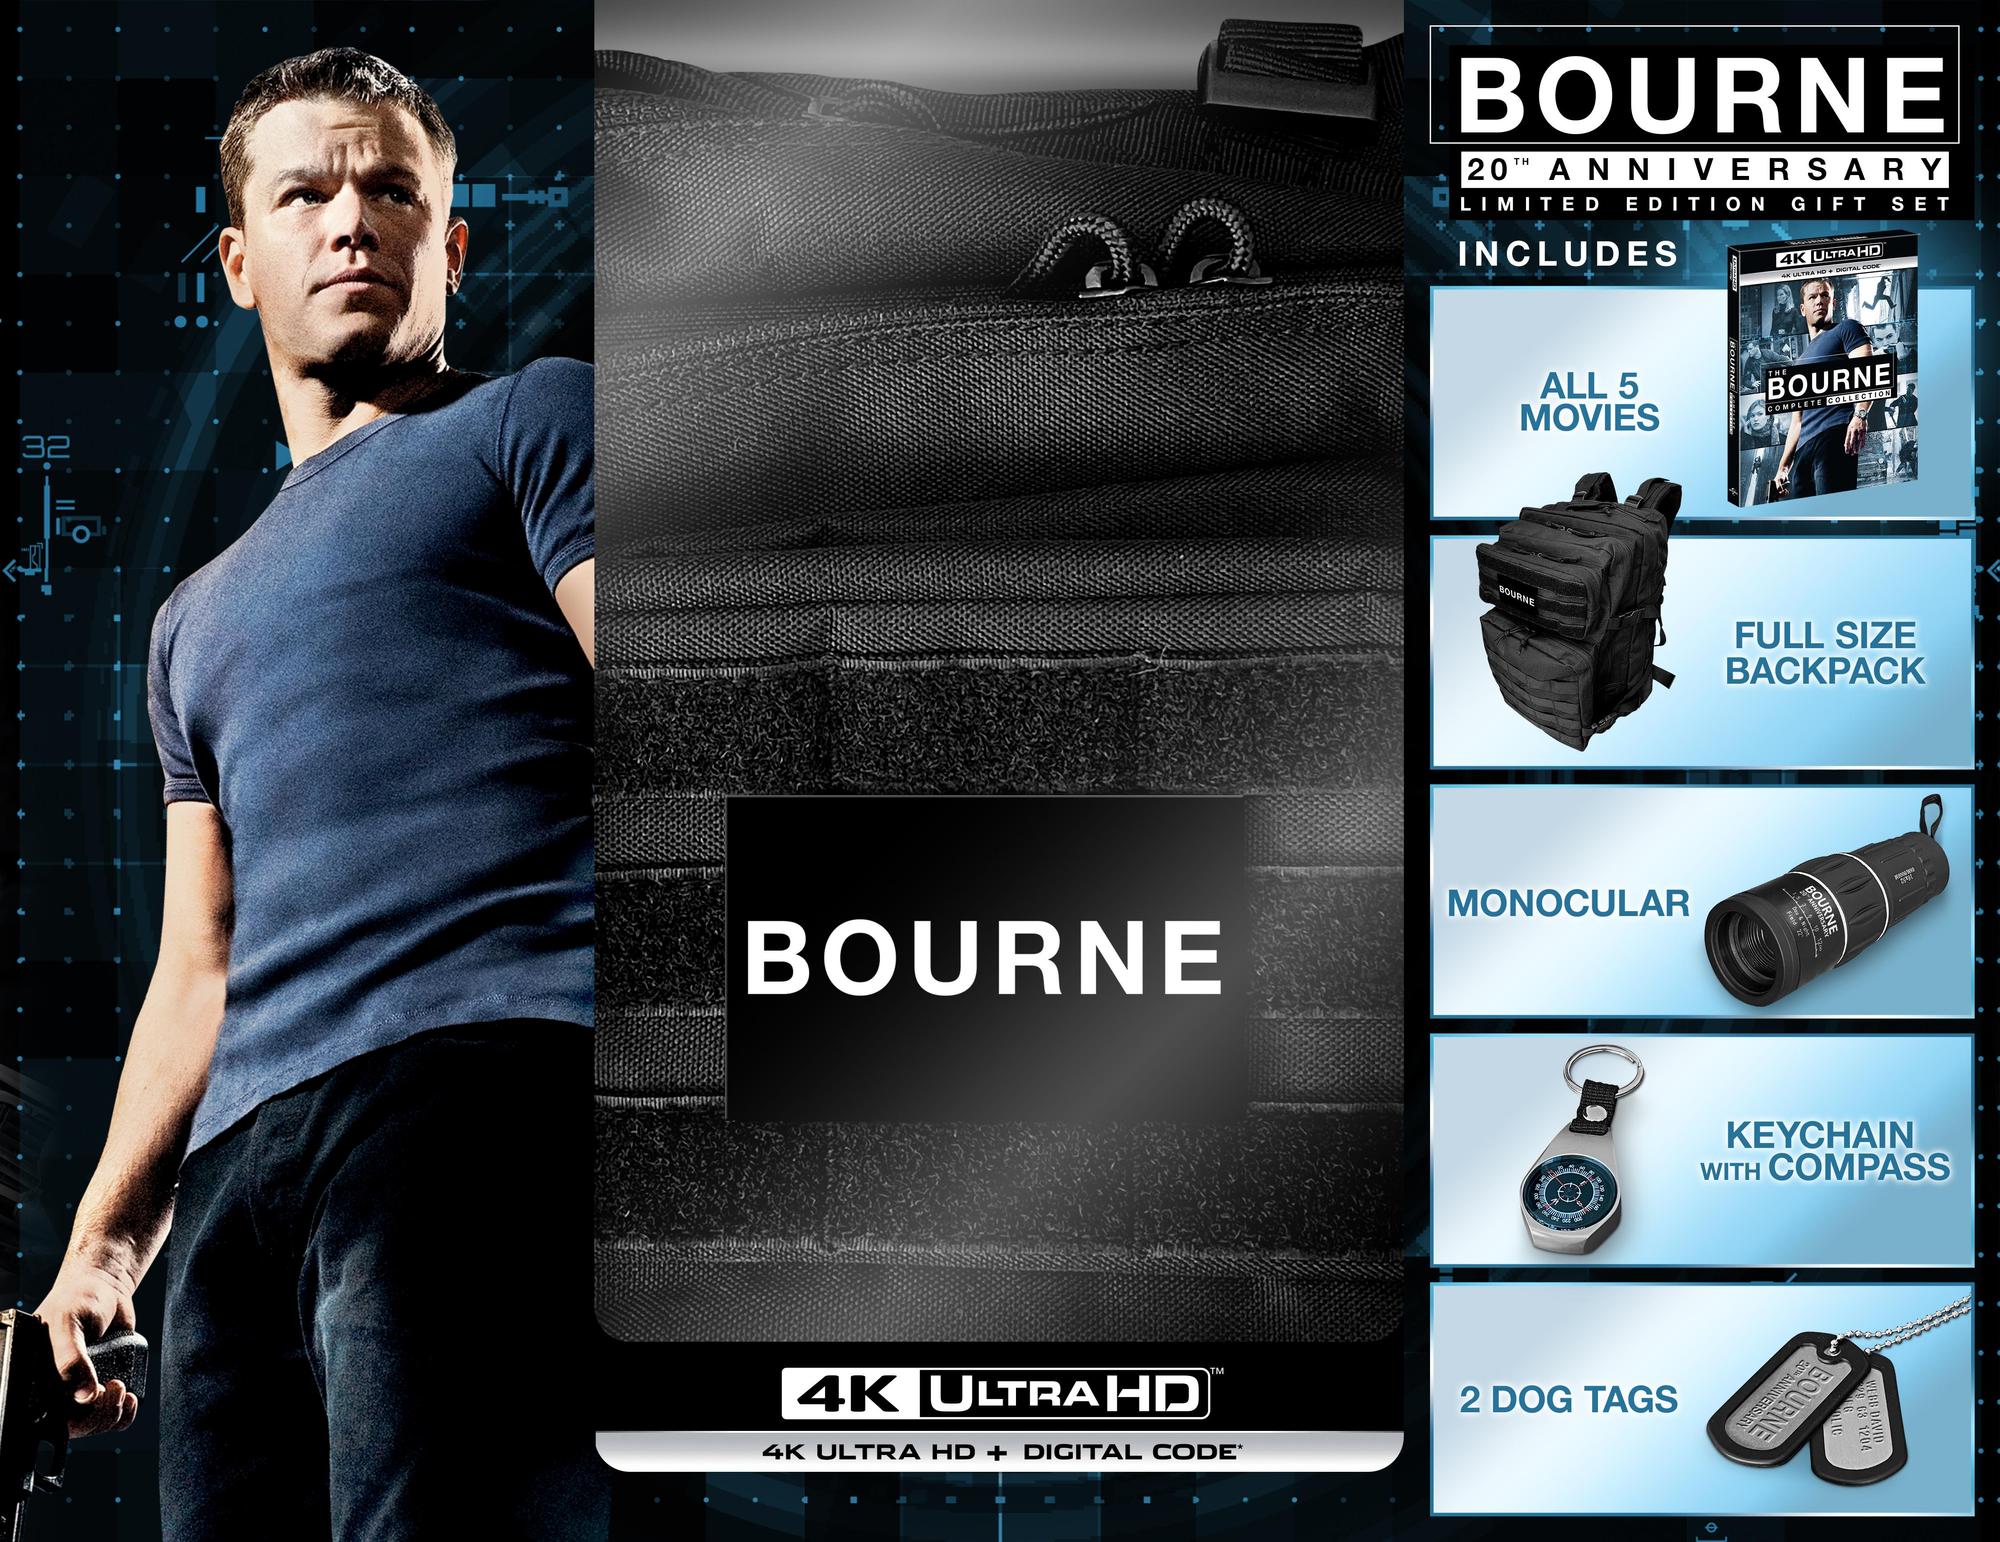 The Bourne Complete Collection - 20th Anniversary Limited Edition Gift Set (4K Ultra HD) [UHD] - image 1 of 4